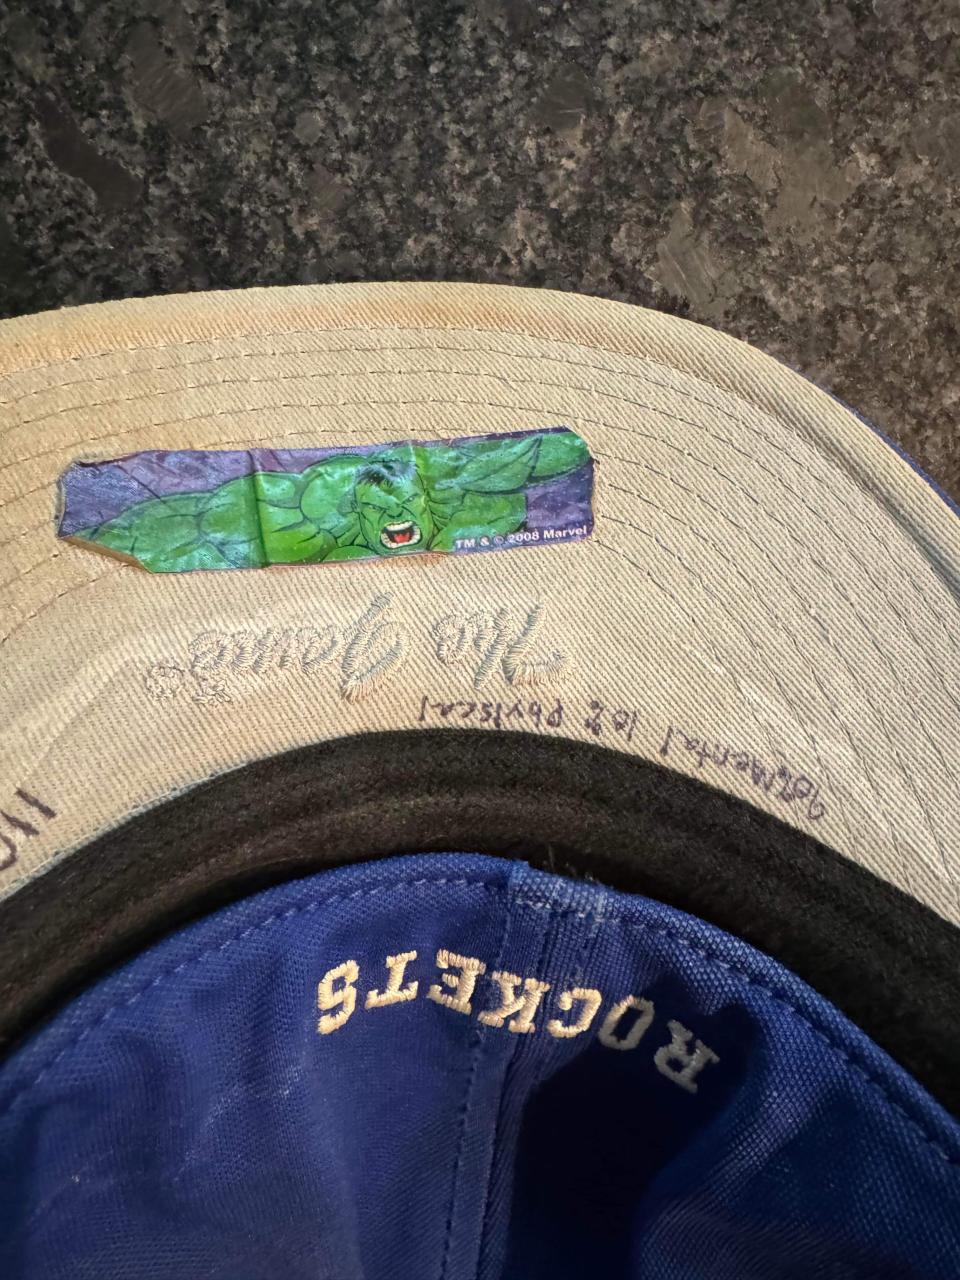 The band-aid that started it all was an Incredible Hulk on the inside of Hunter Jewell's high school baseball hat.